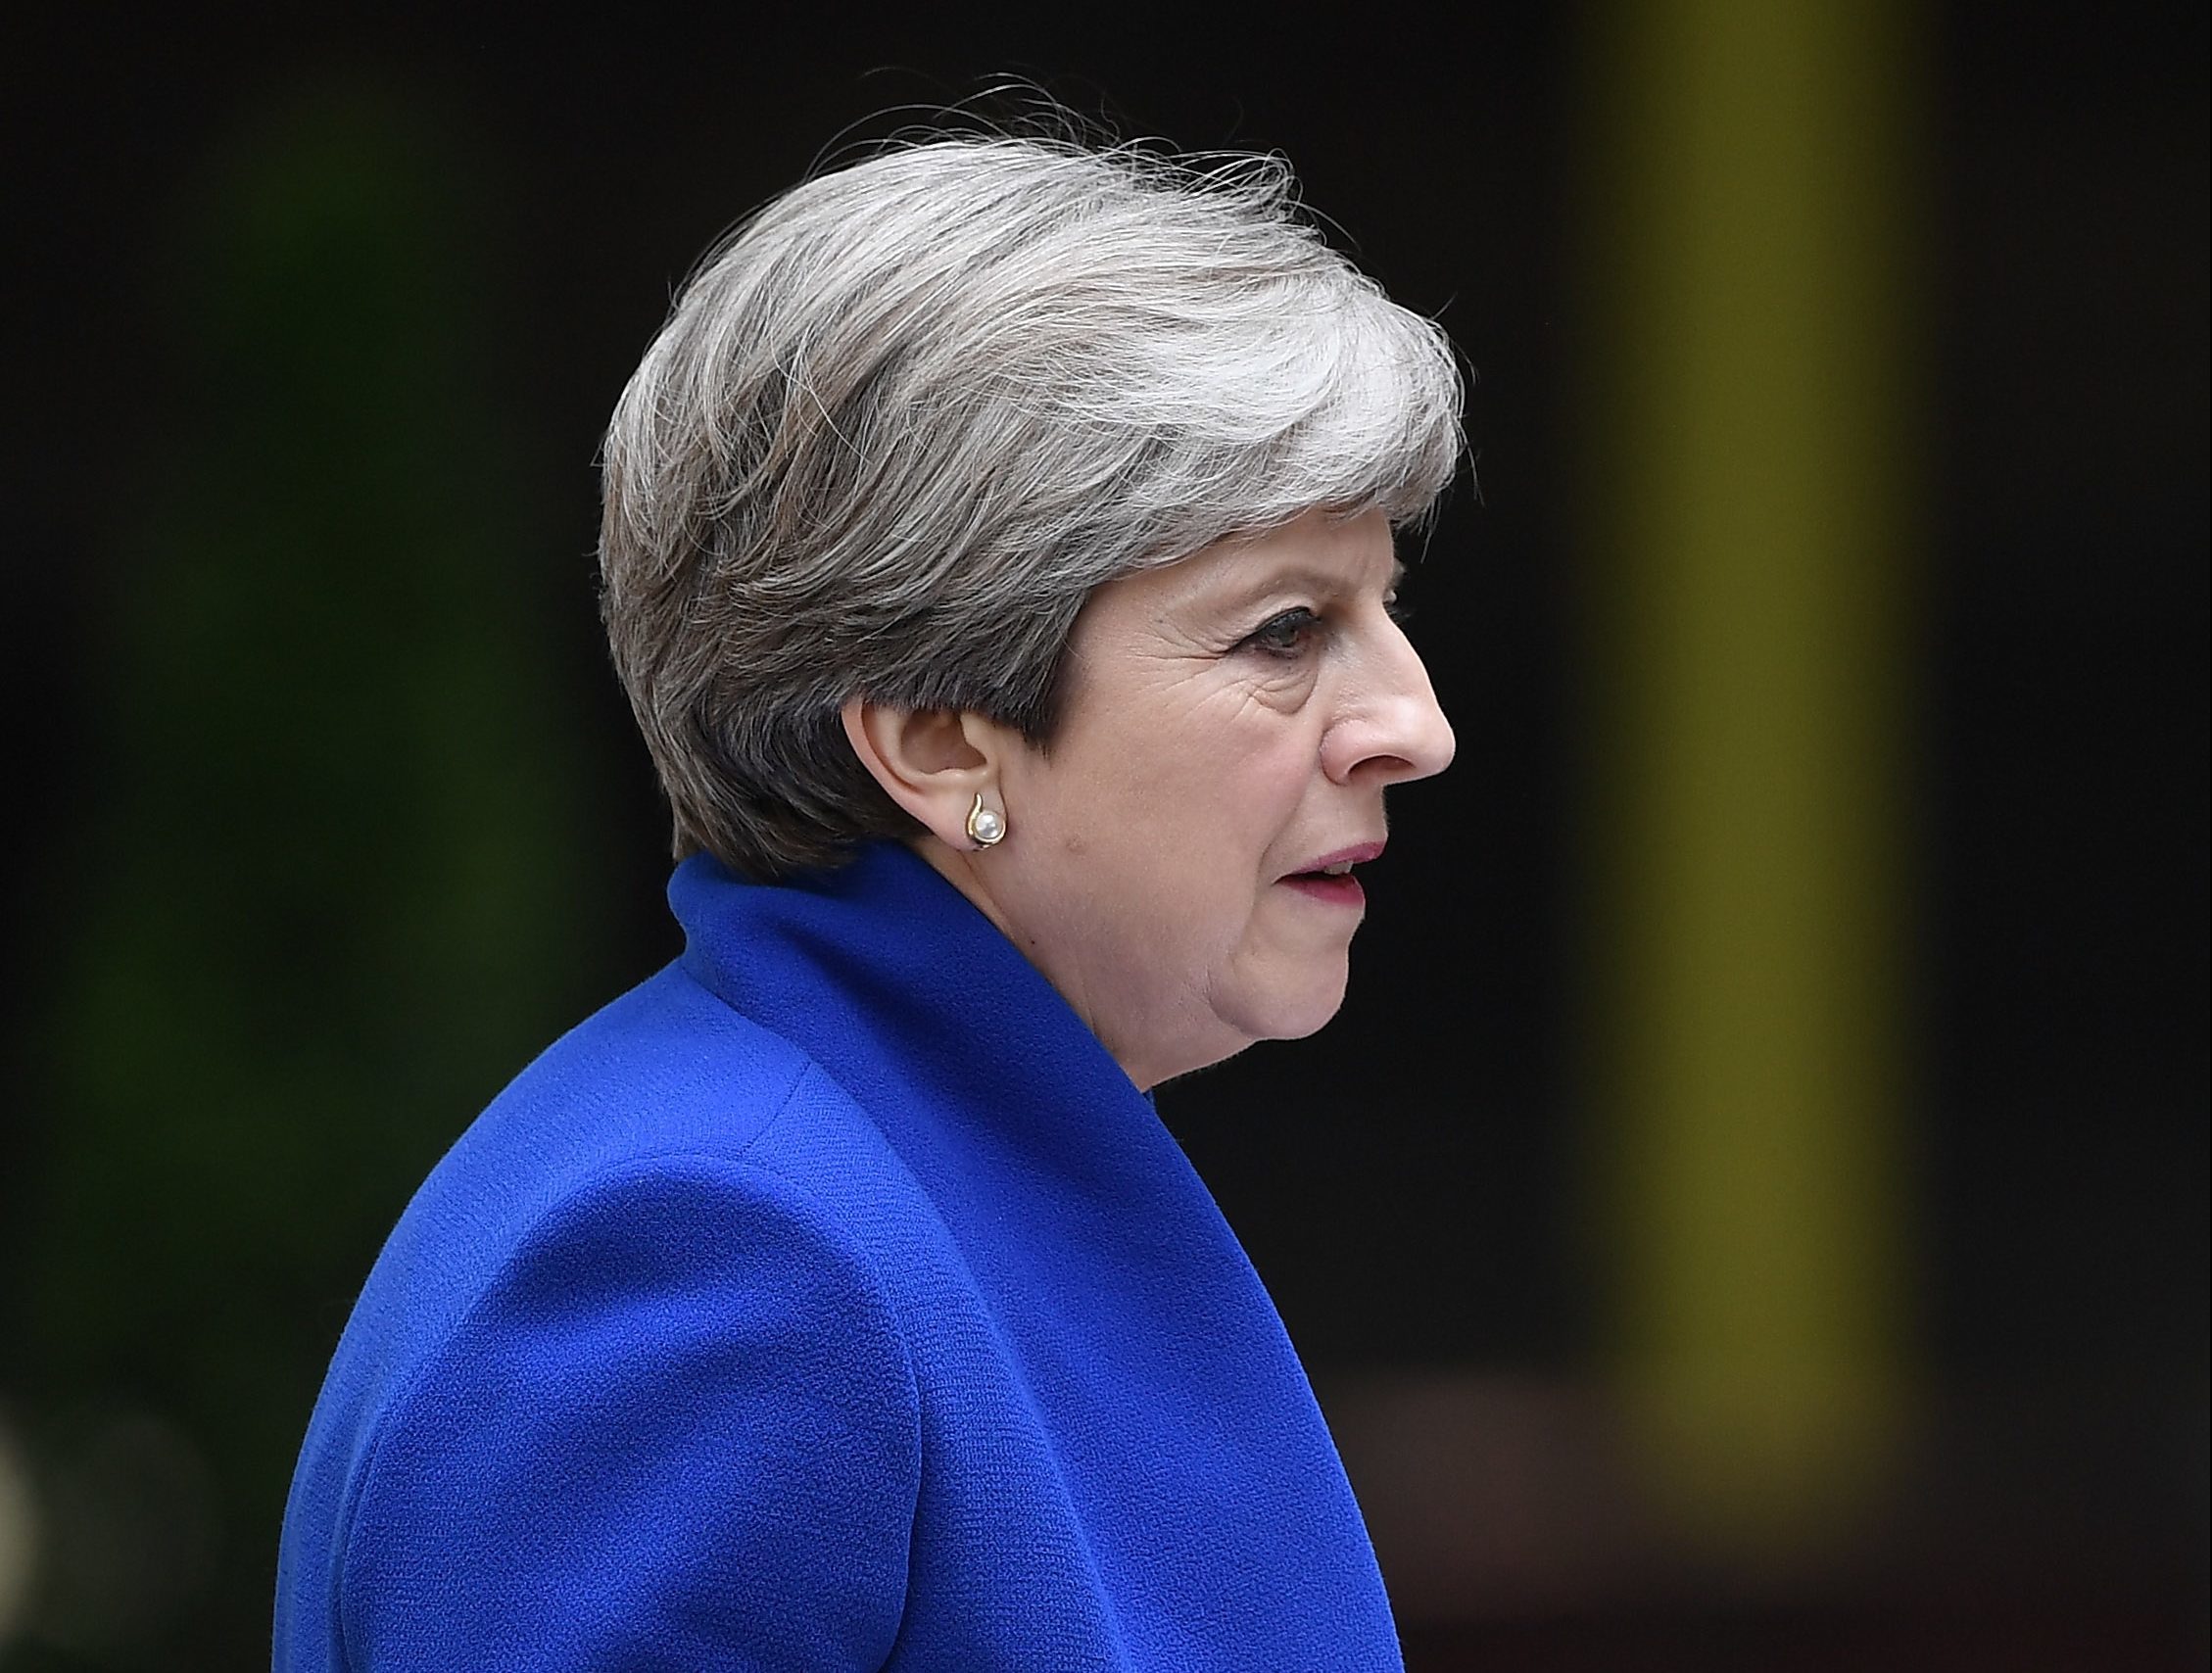 After a snap election was called by Prime Minister Theresa May the United Kingdom went to the polls yesterday. The closely fought election has failed to return a clear overall majority winner and a hung parliament has been declared. (Carl Court/Getty Images)